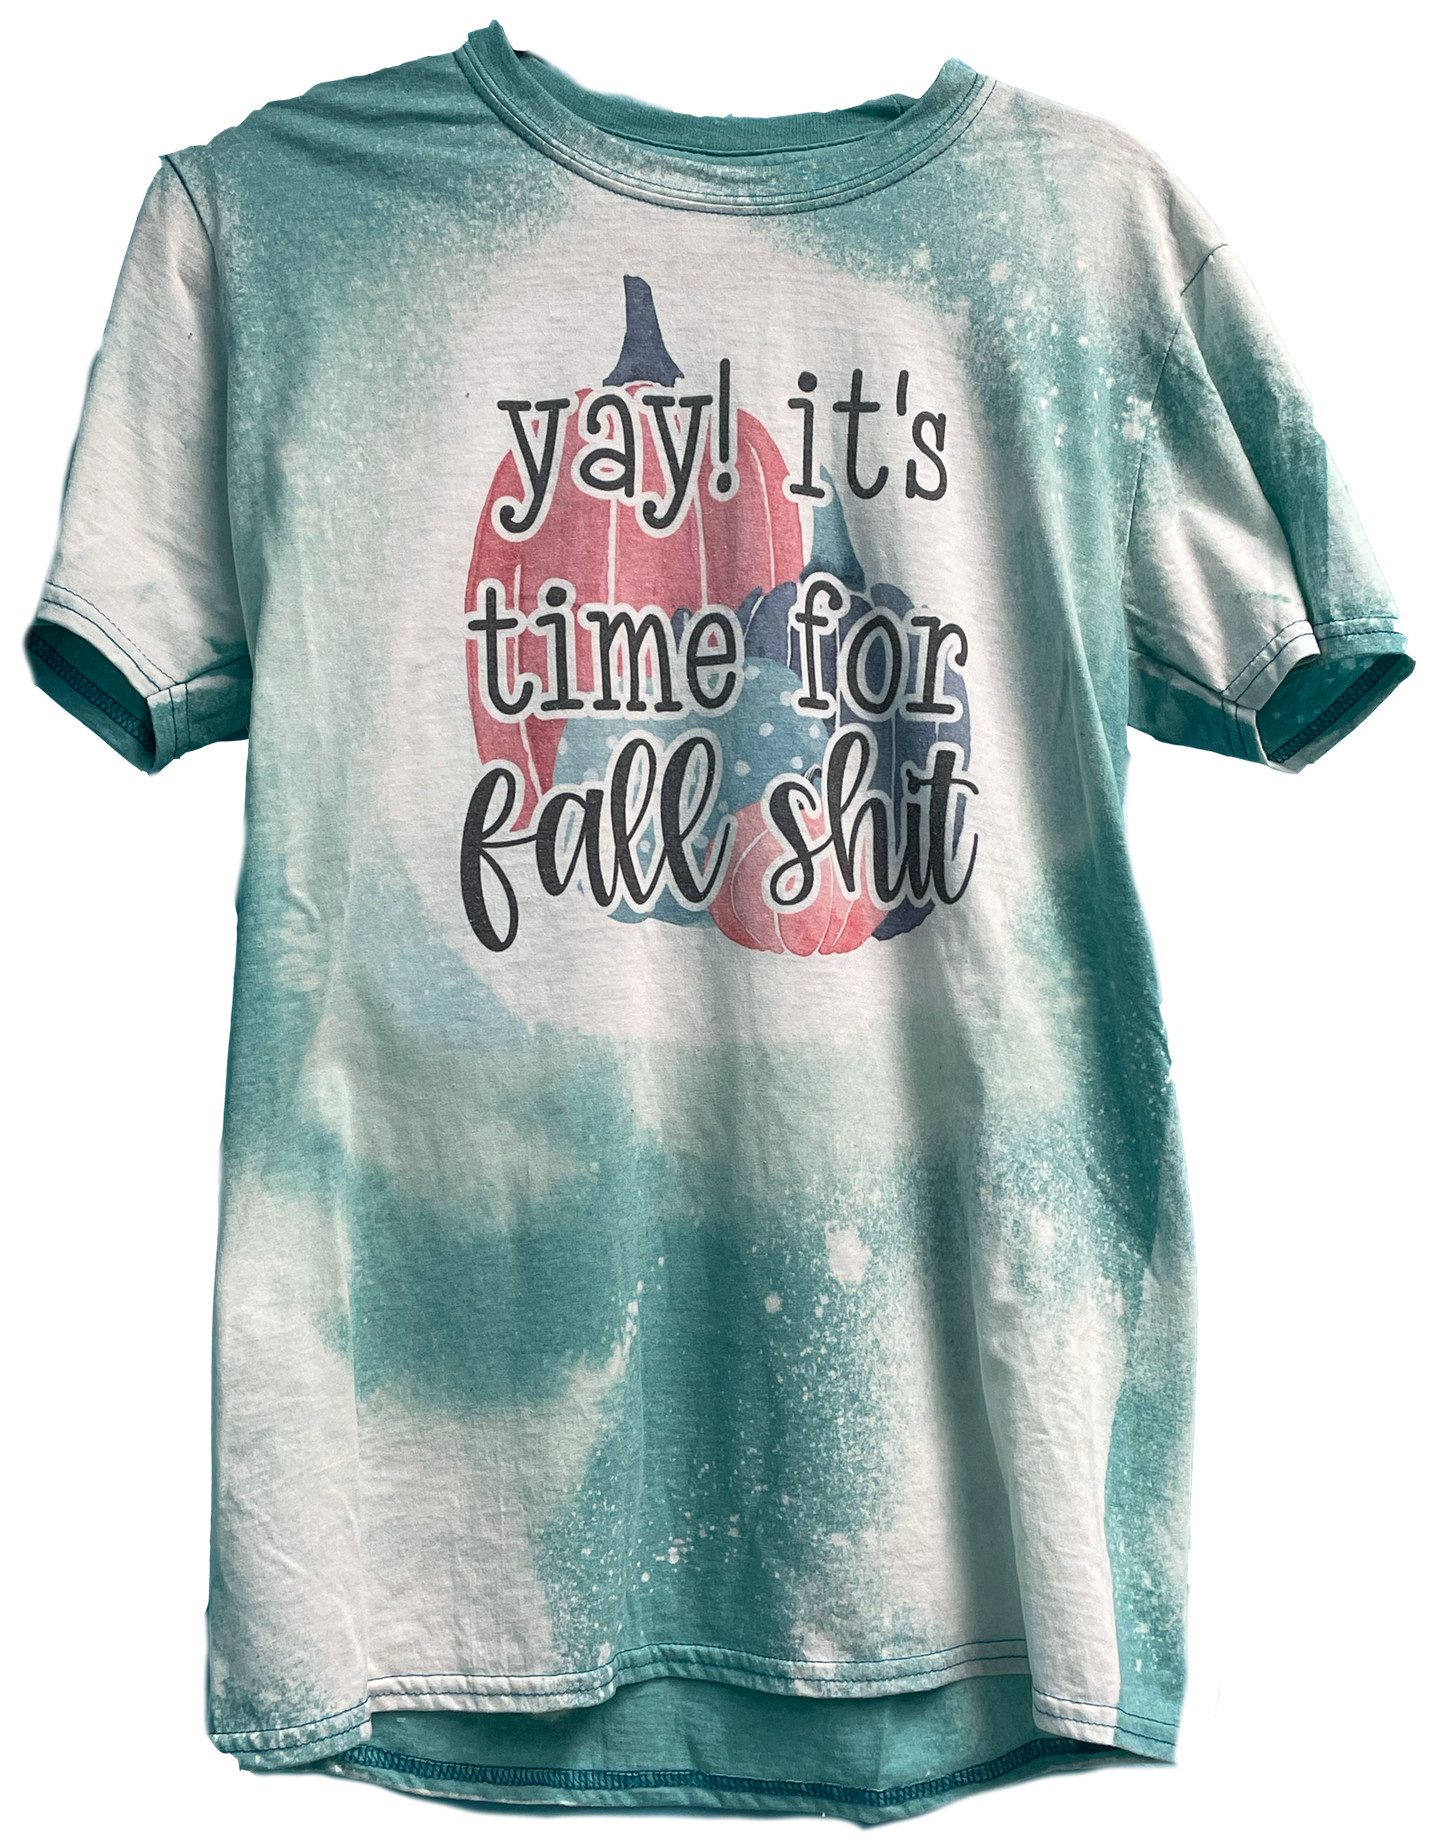 Yay! Its's time for fall shit t-shirt